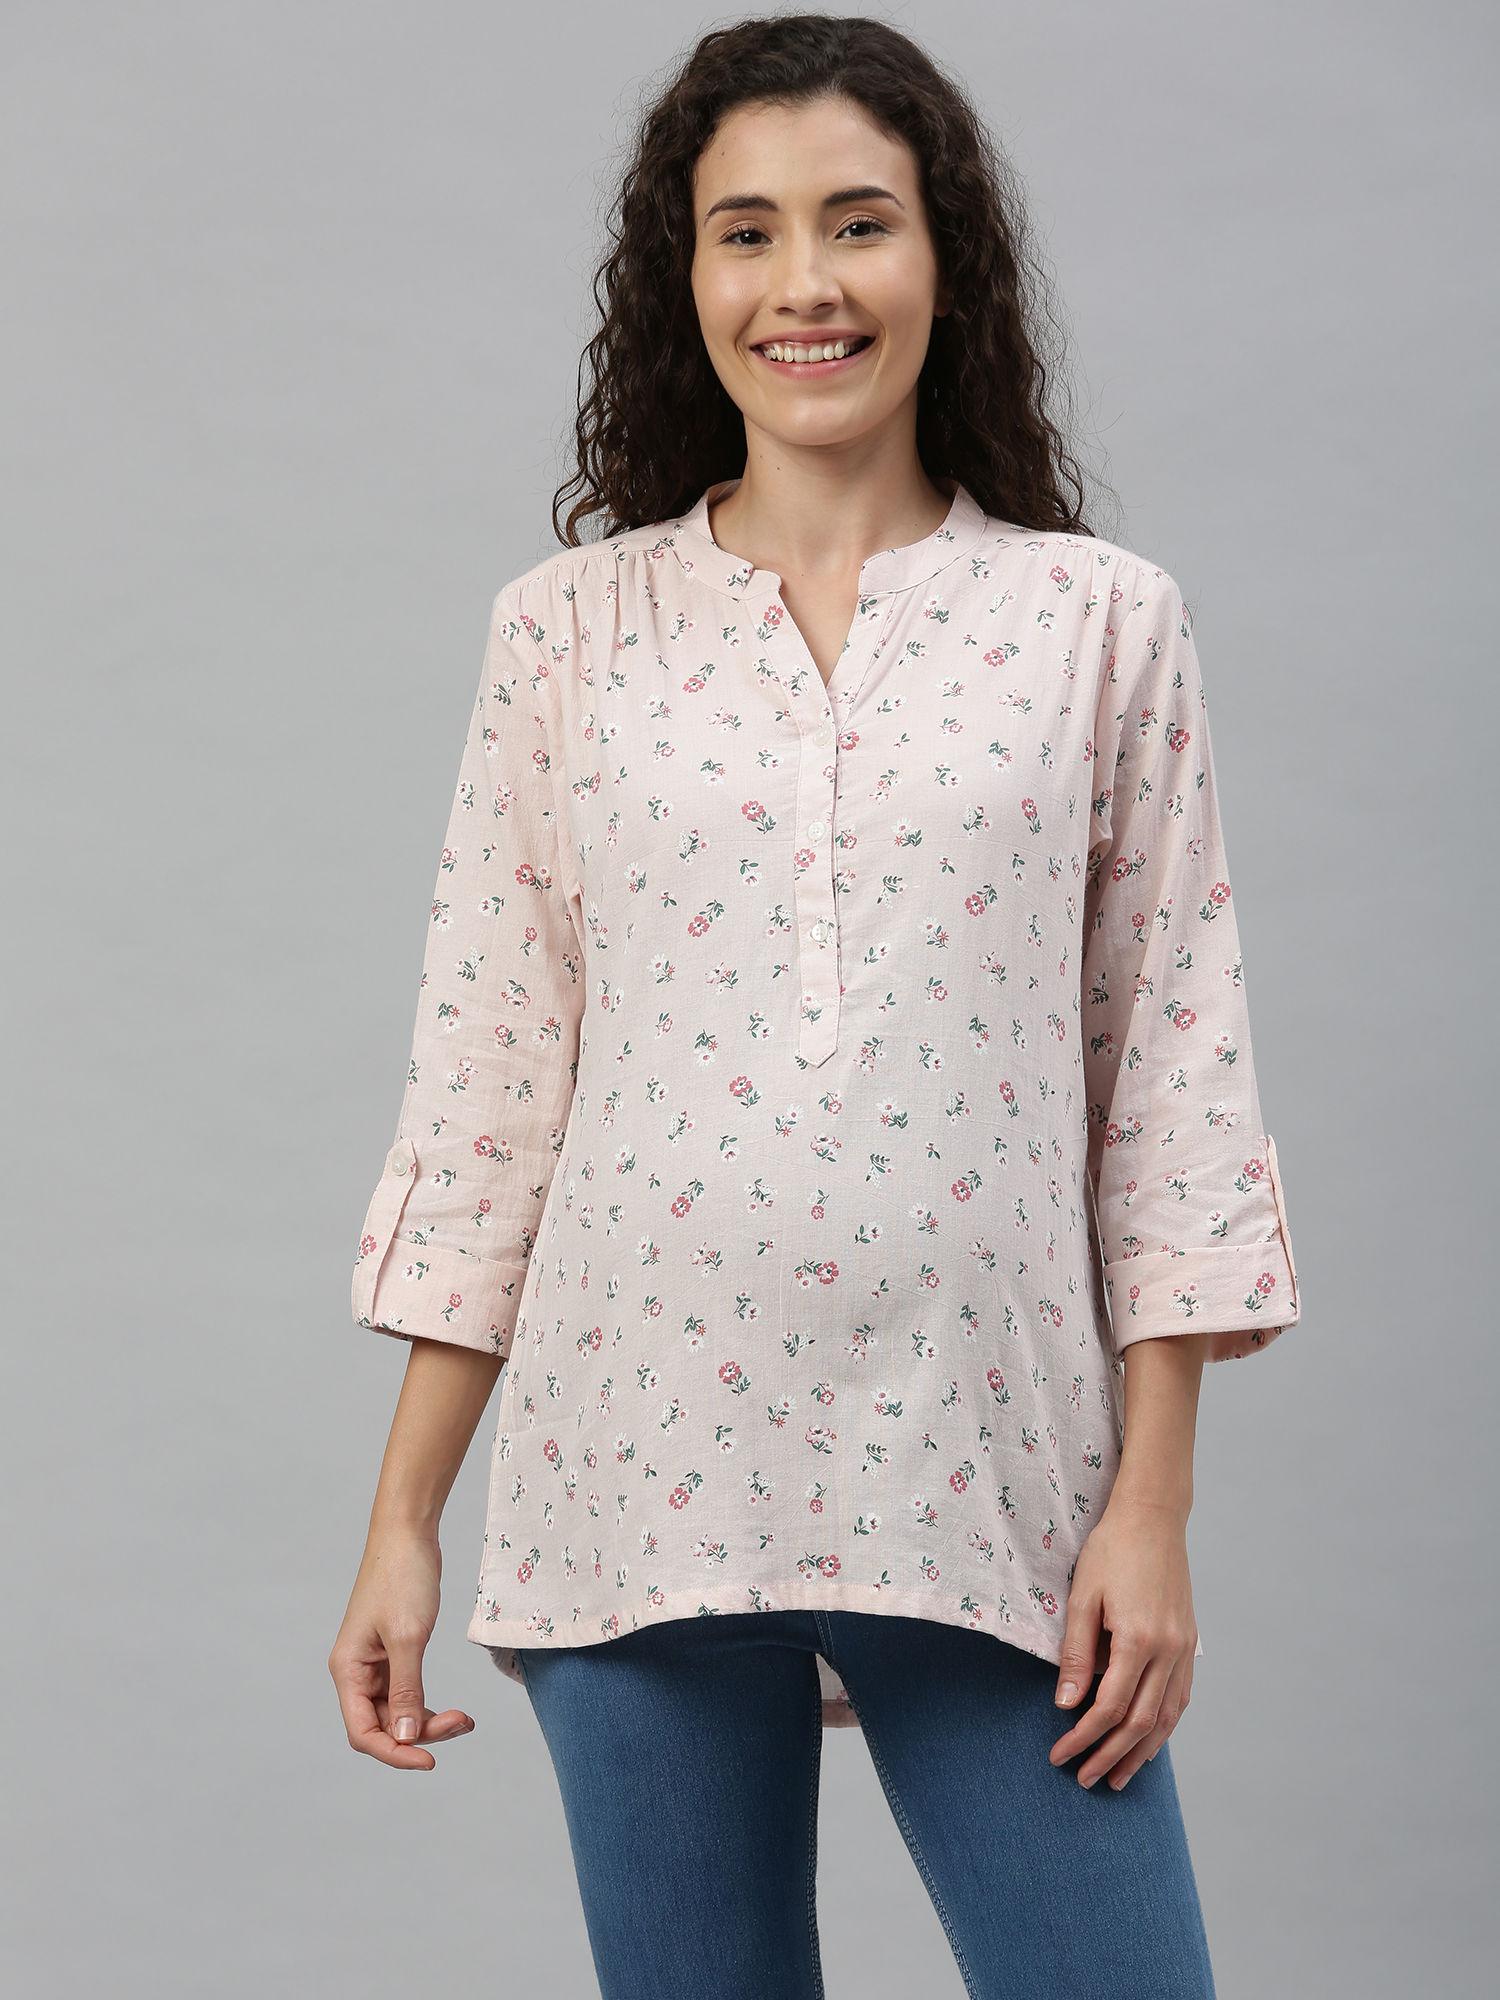 maternity top - pink